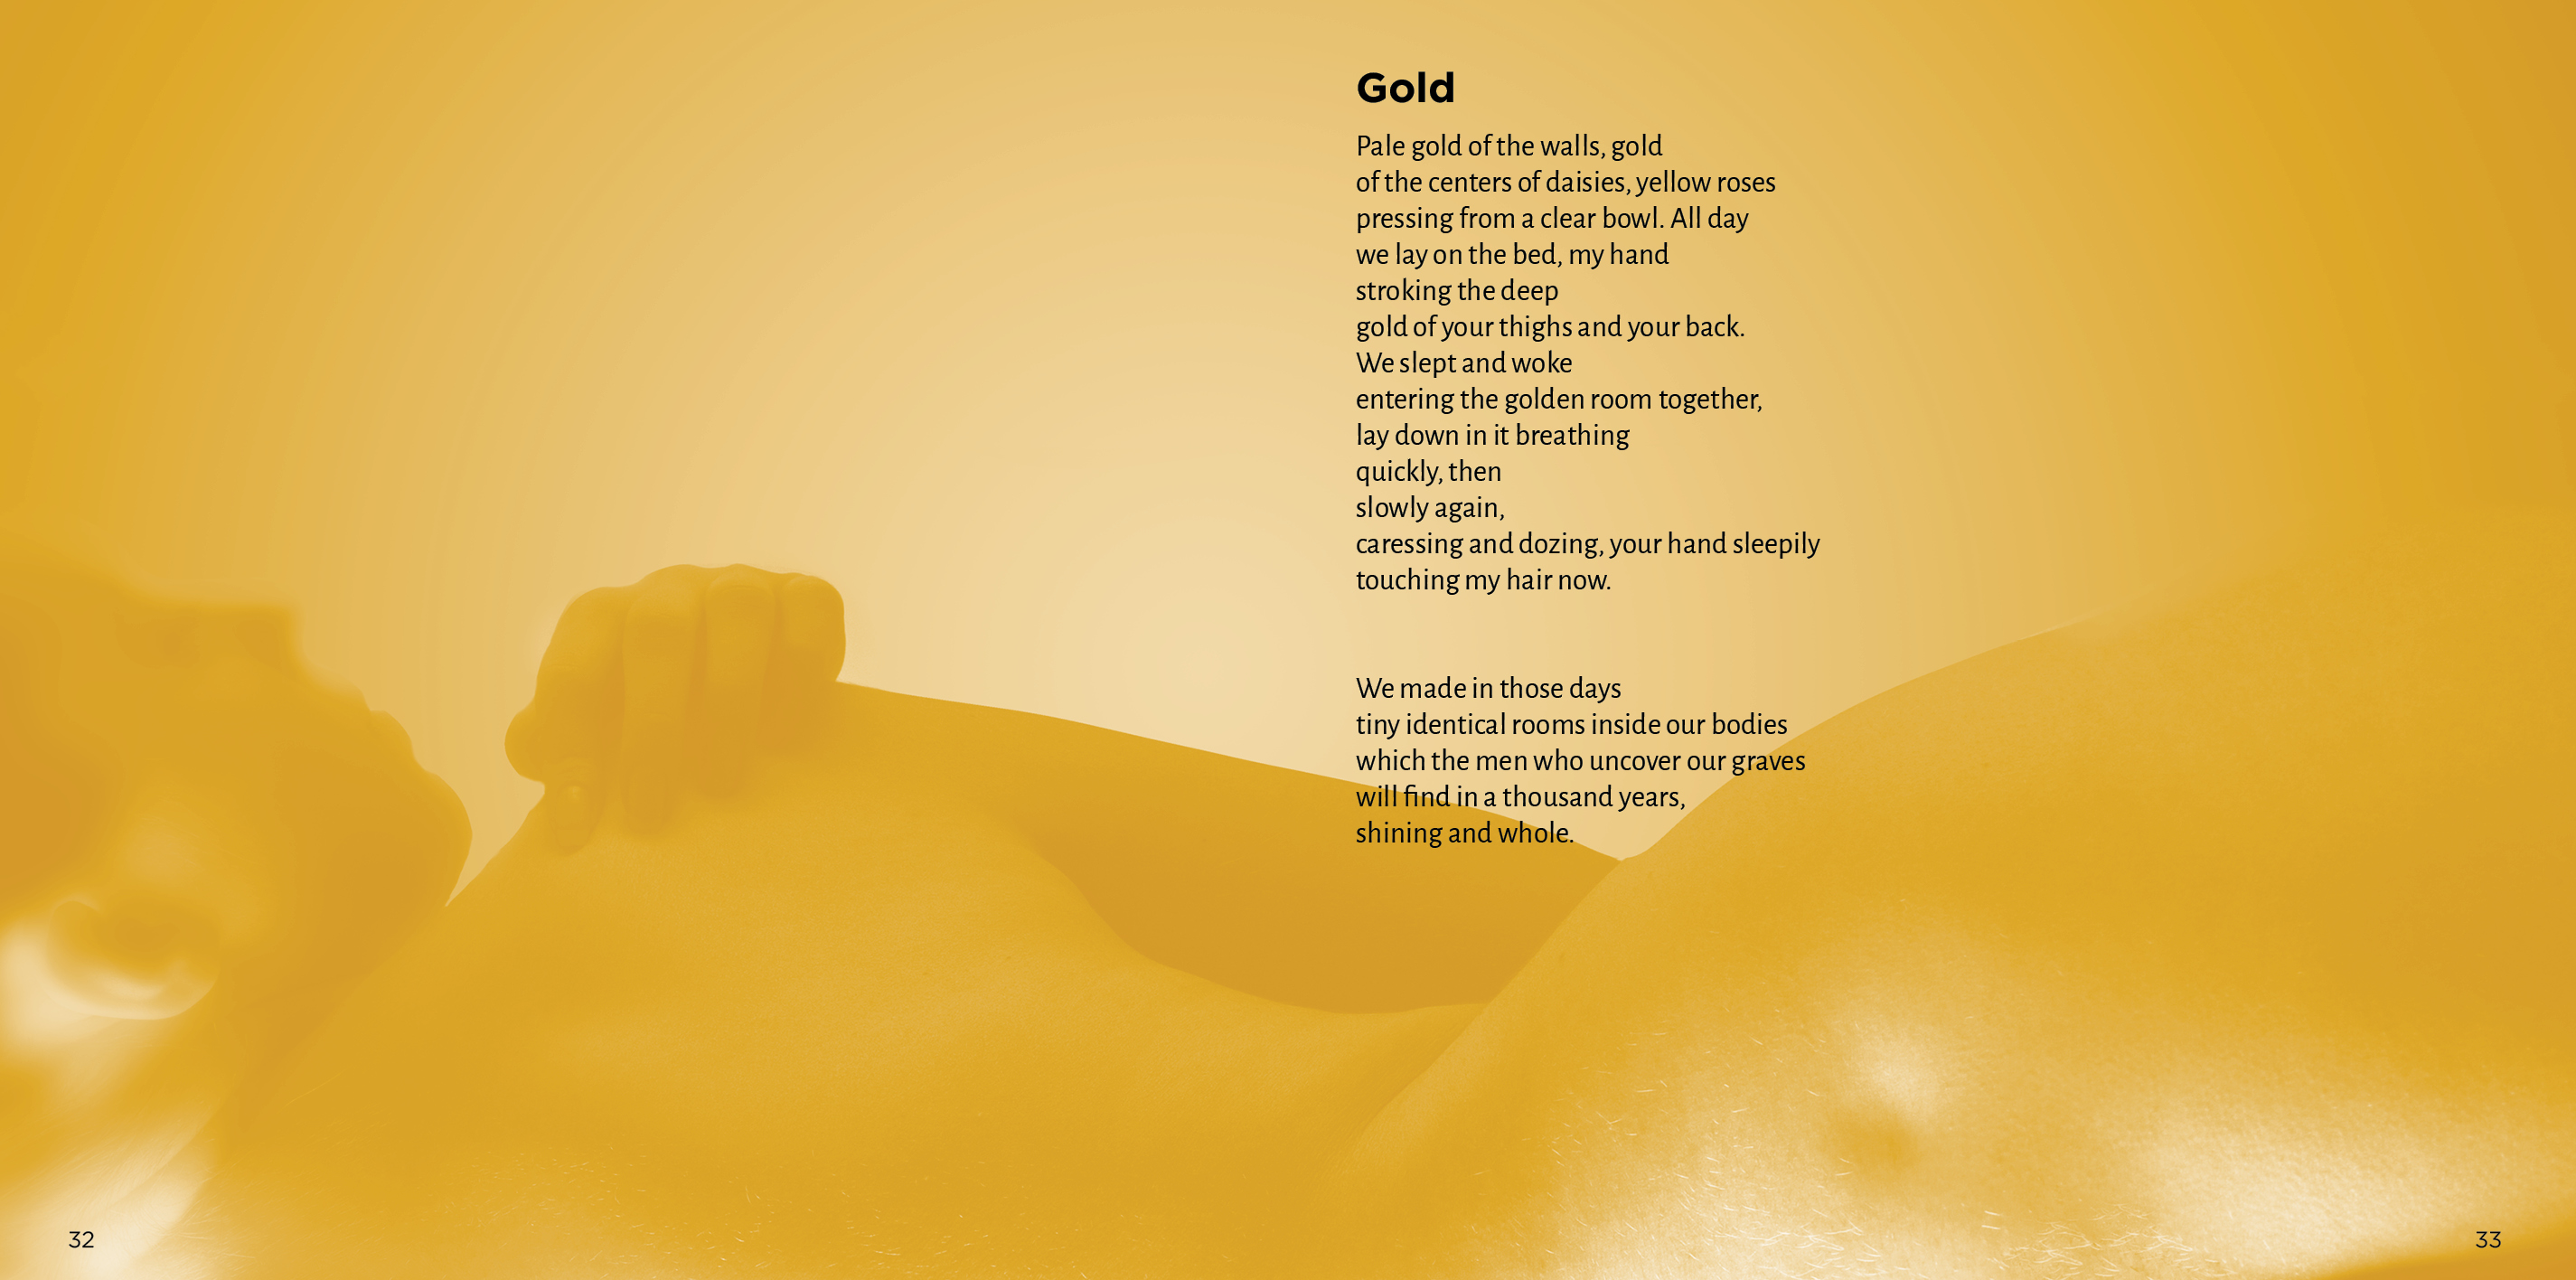 Gold by Donald Hall